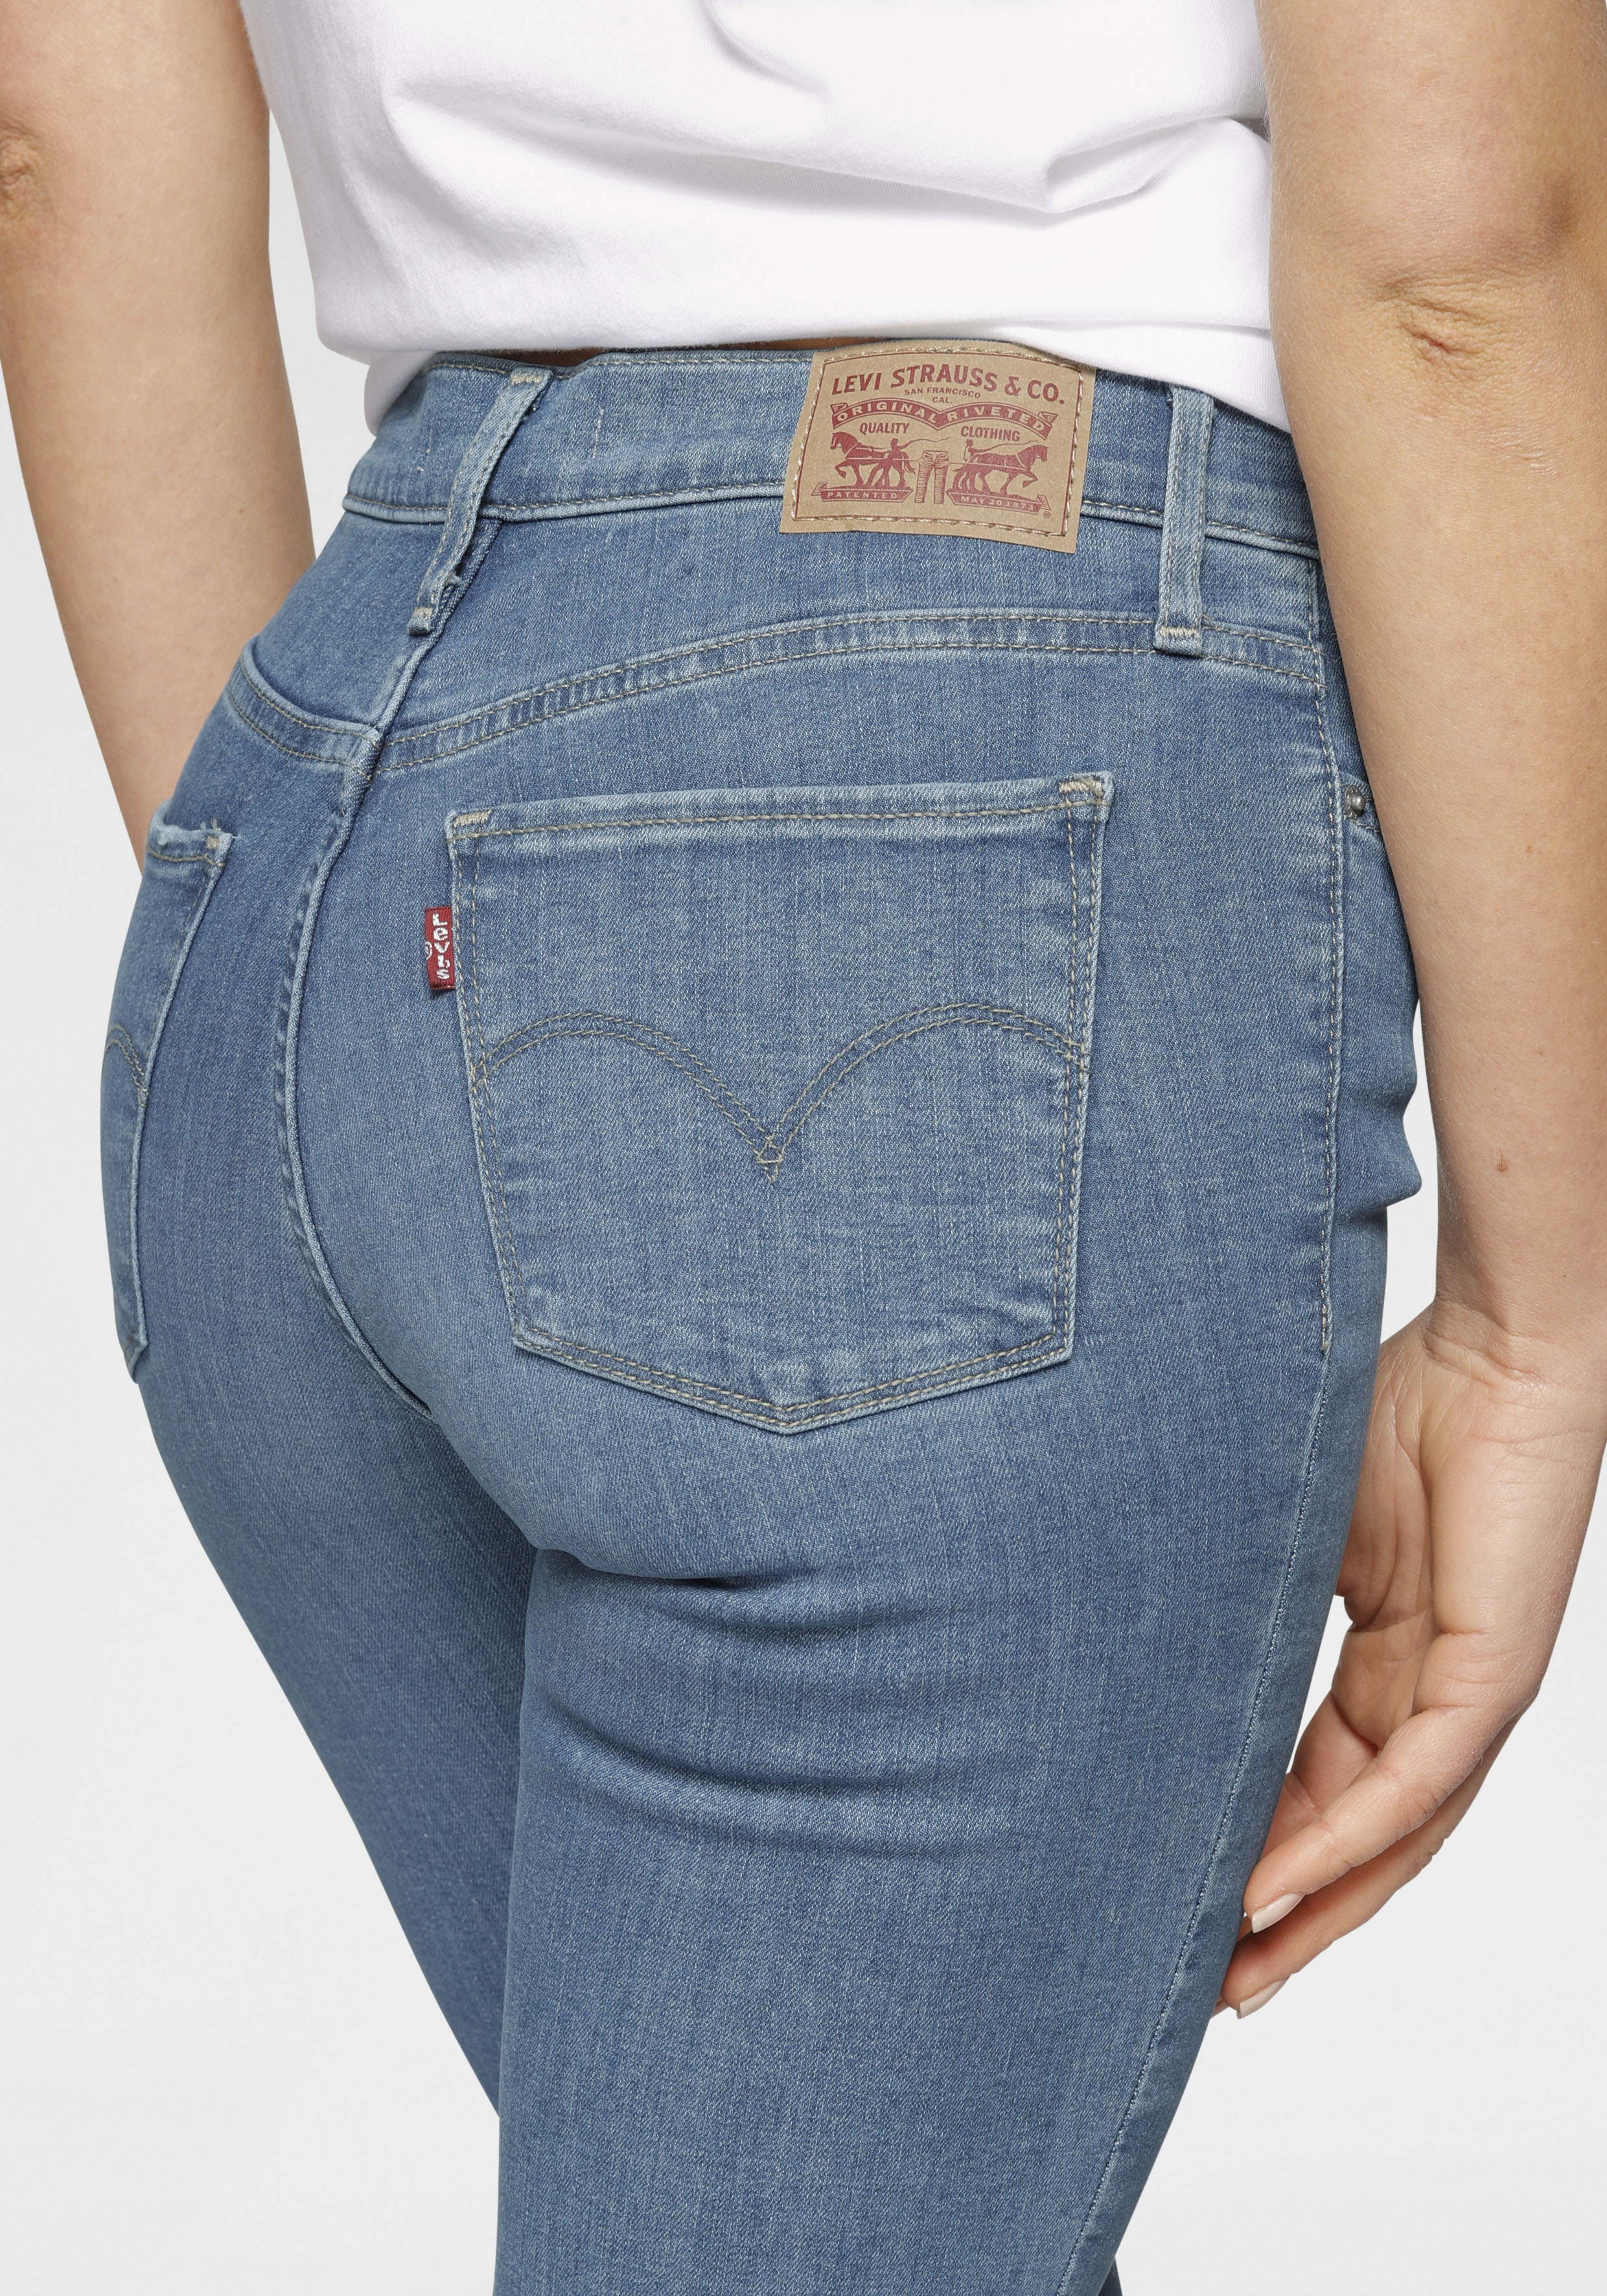 Levis Skinny-fit-Jeans "310 Shaping Super Skinny" 3